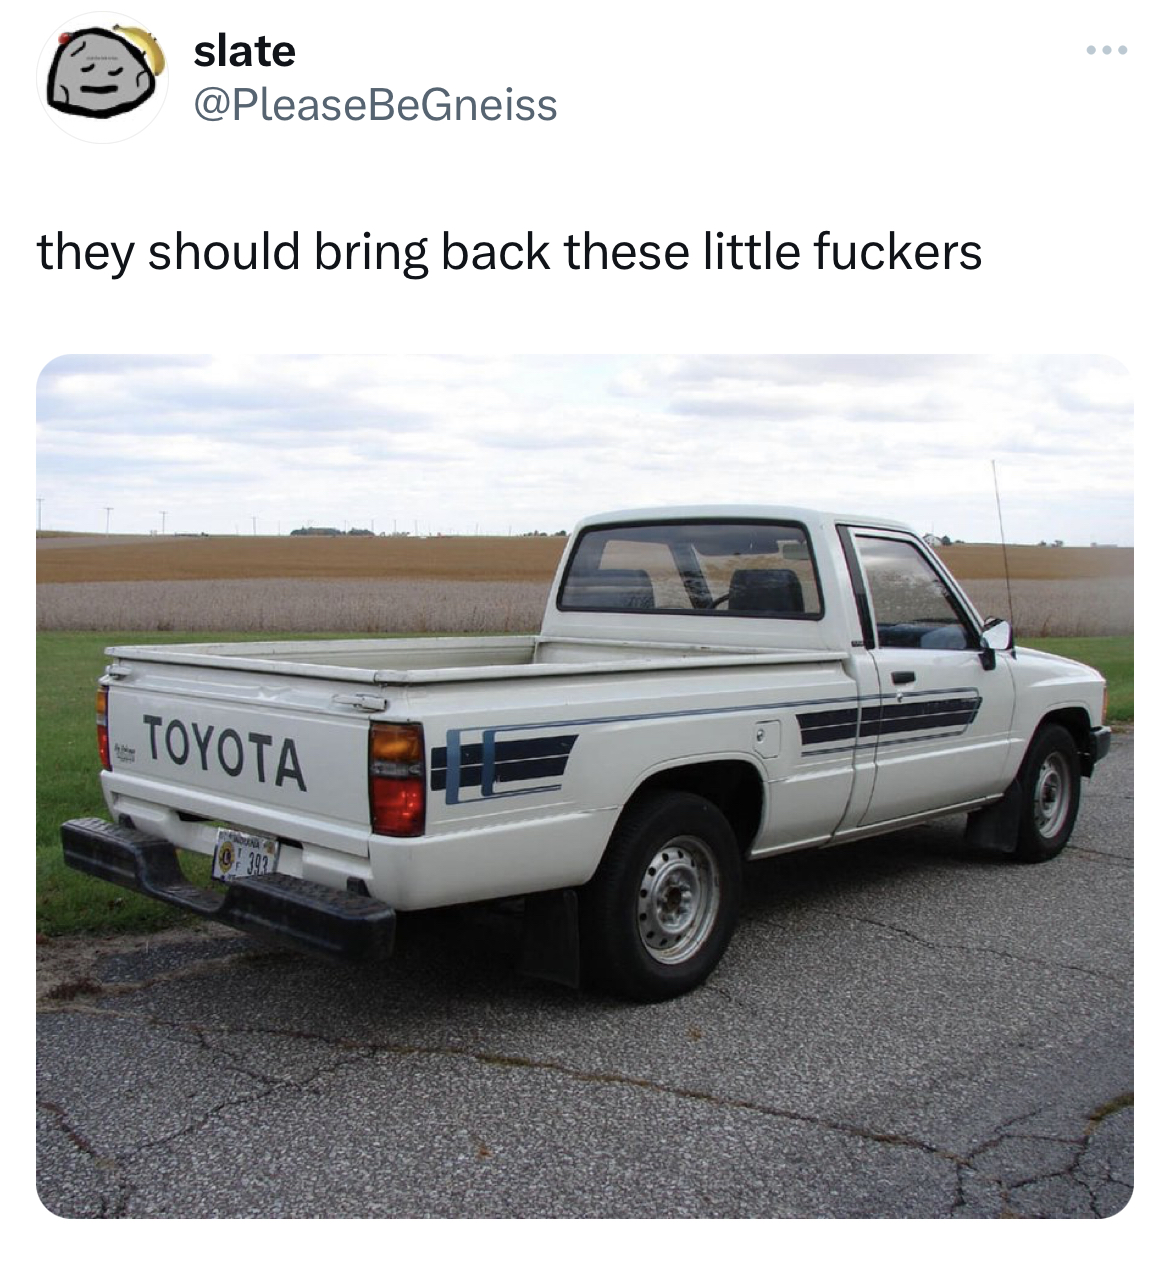 savage and salty tweets - 1988 toyota truck - slate they should bring back these little fuckers Toyota